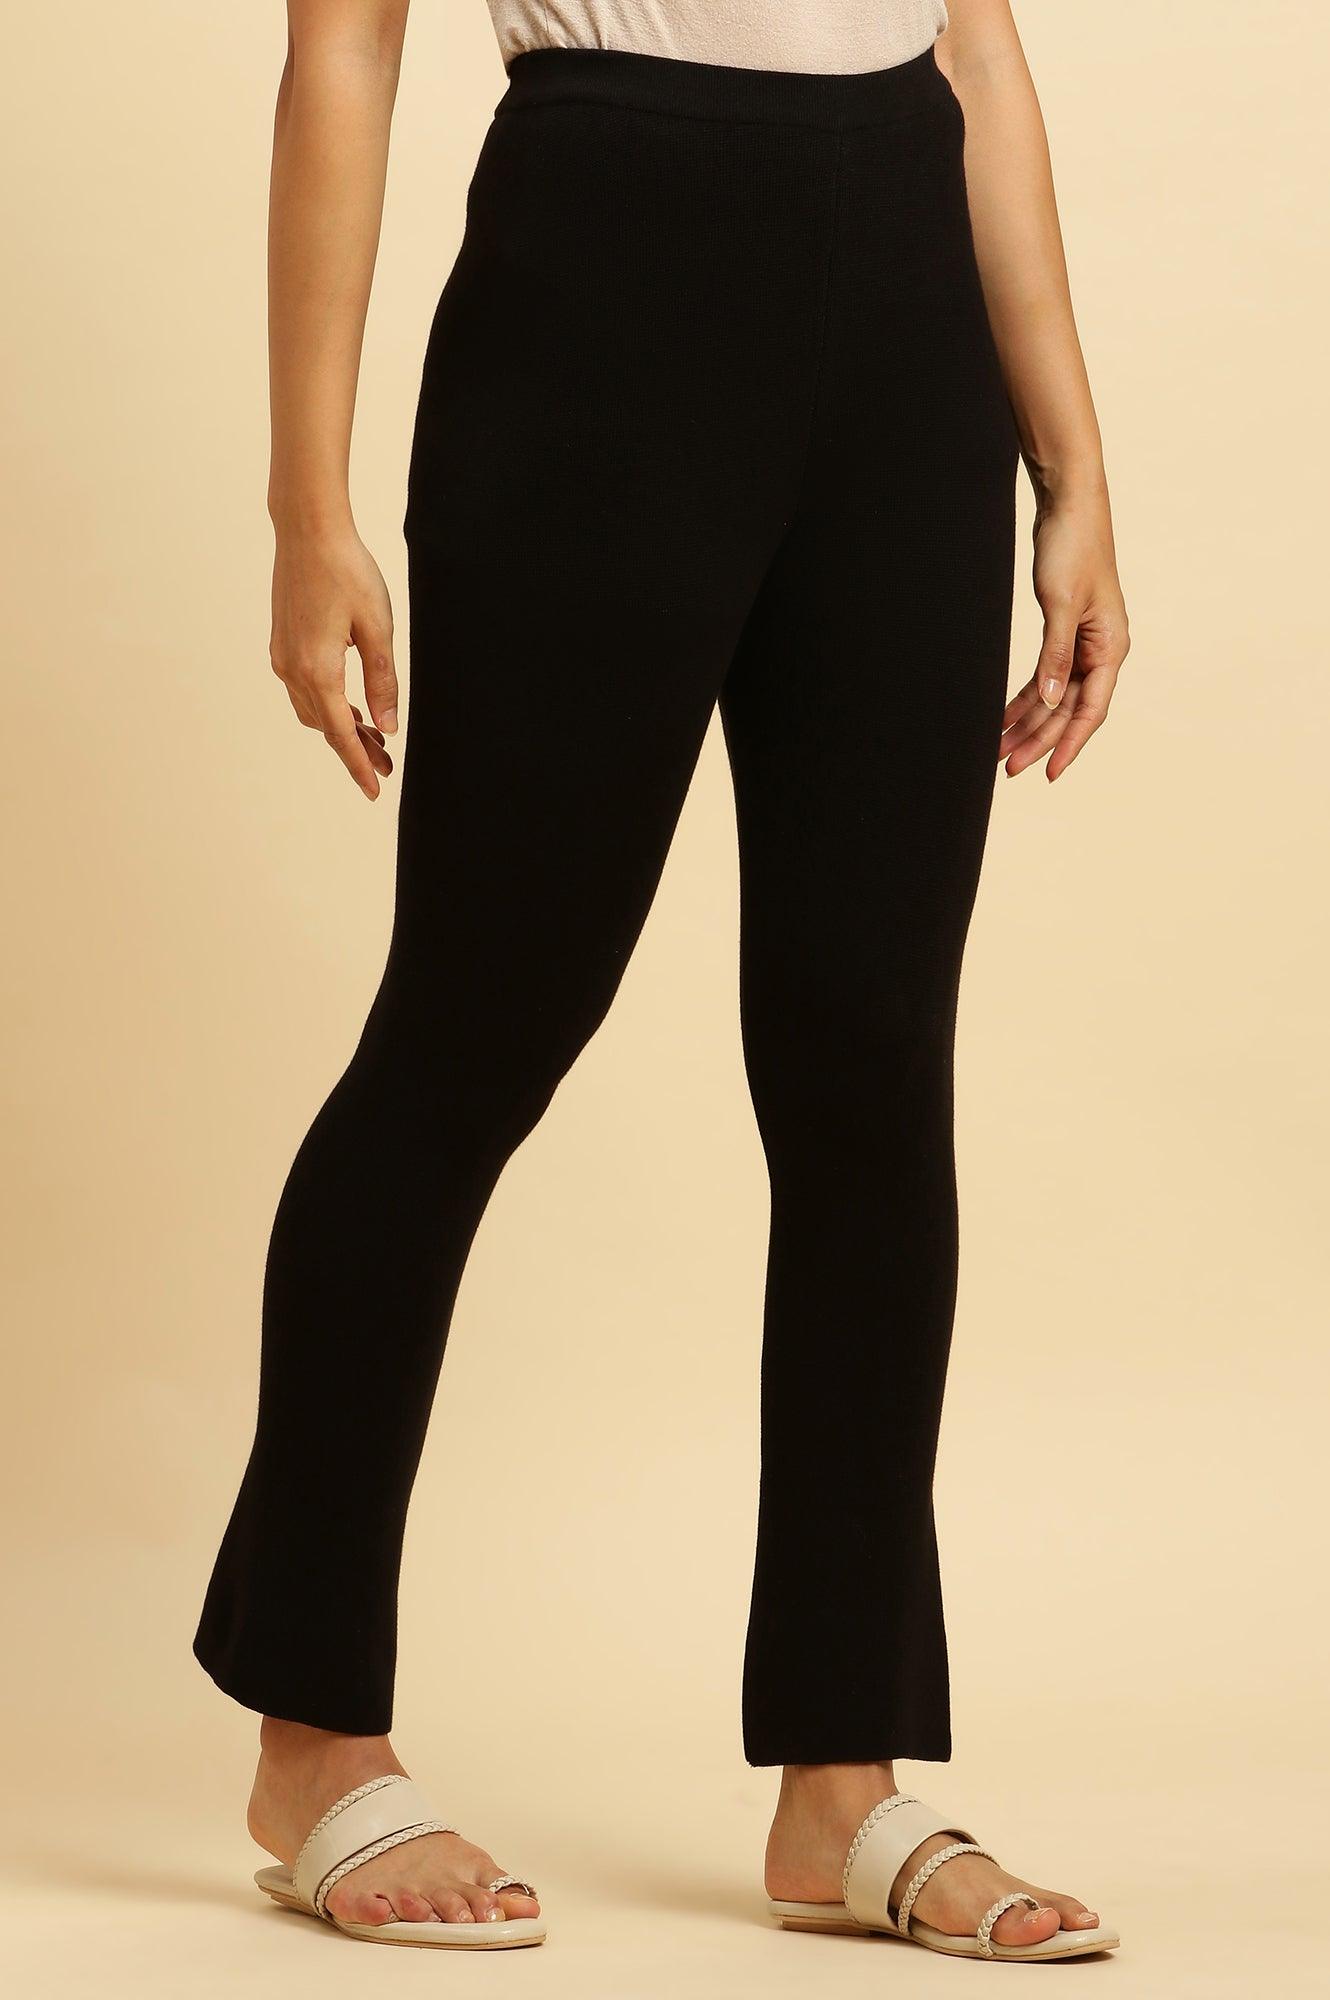 Black Solid Fit And Flare Pants - wforwoman